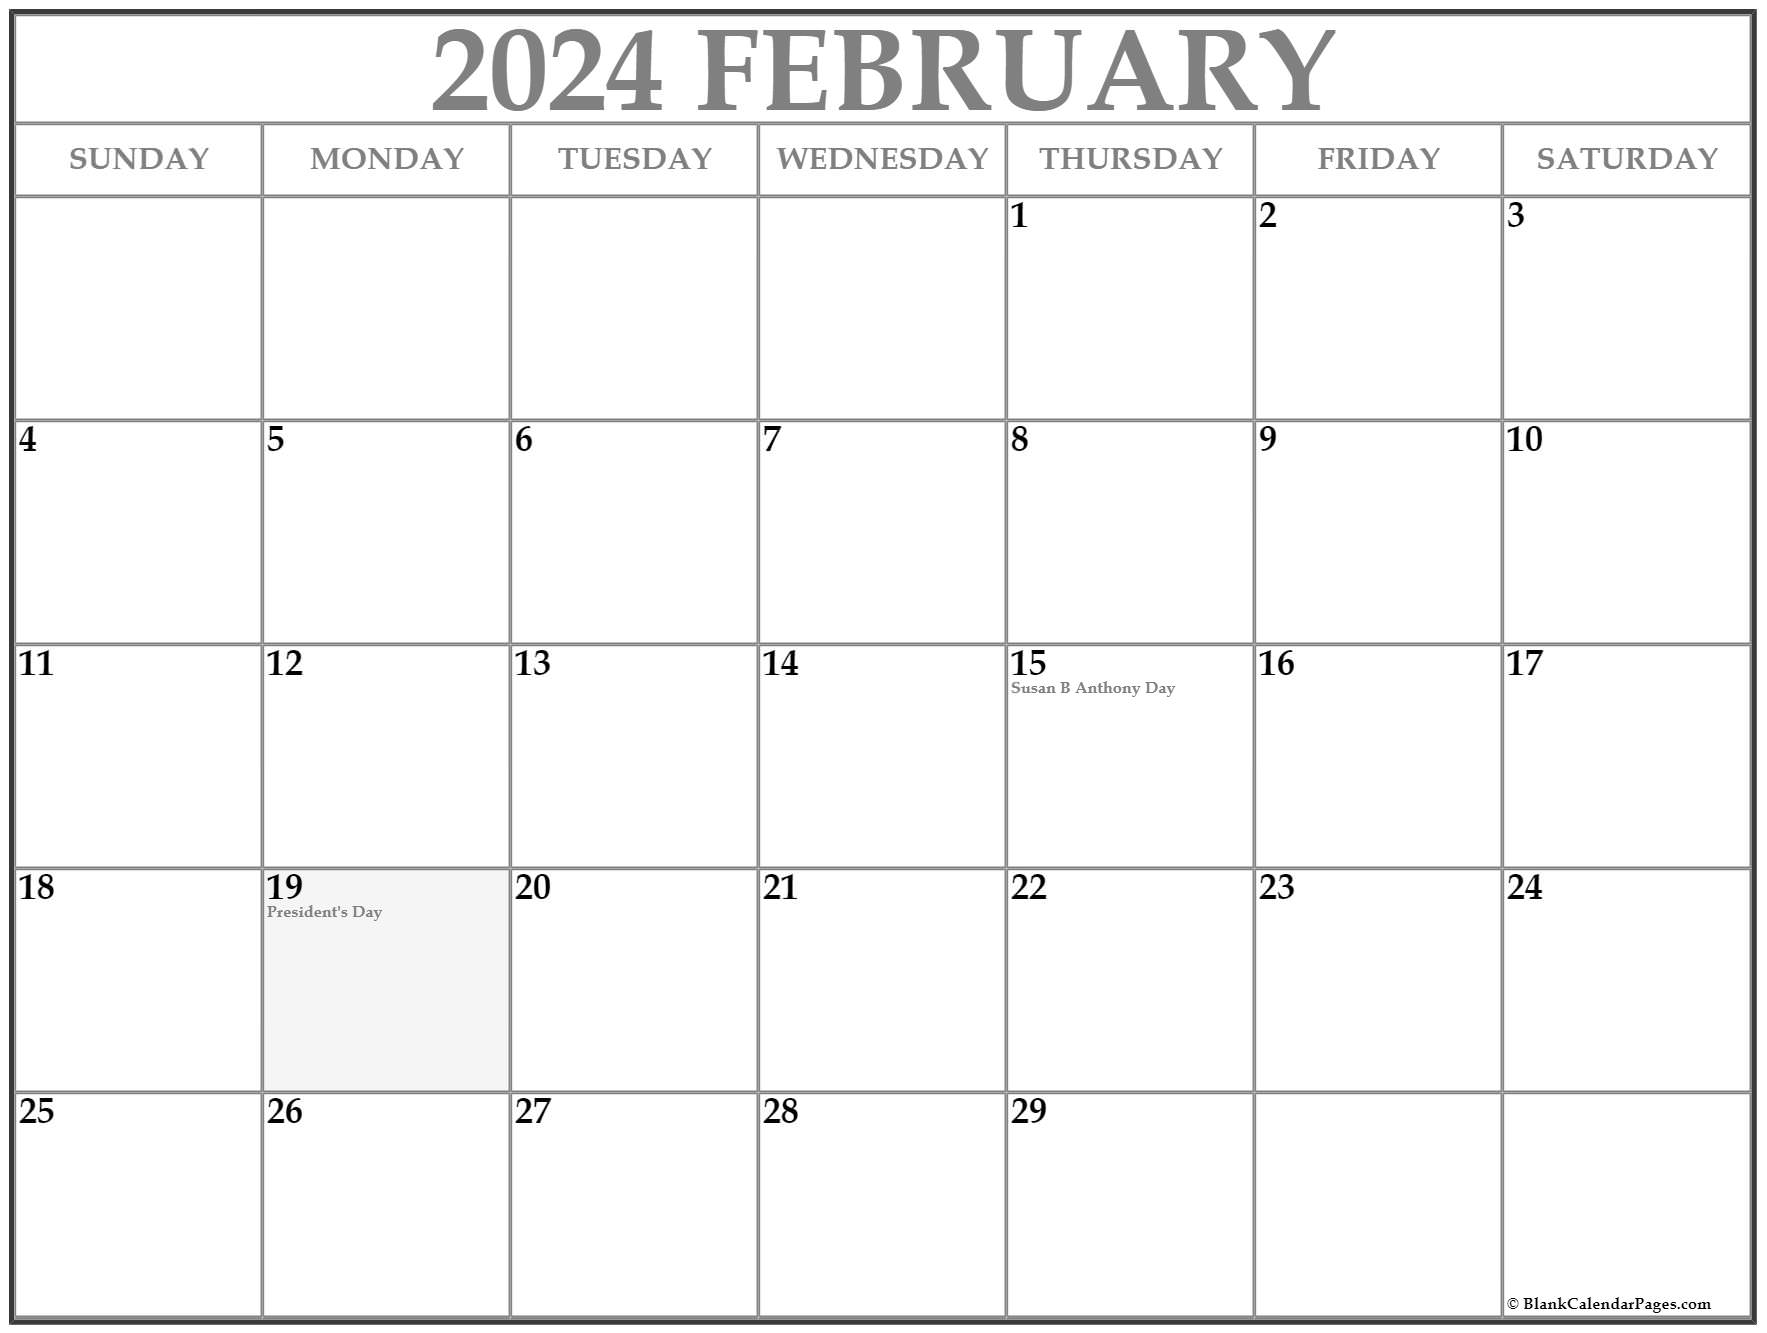 Feb Days To Celebrate 2024 Latest Top The Best Review Of February Valentine Day 2024